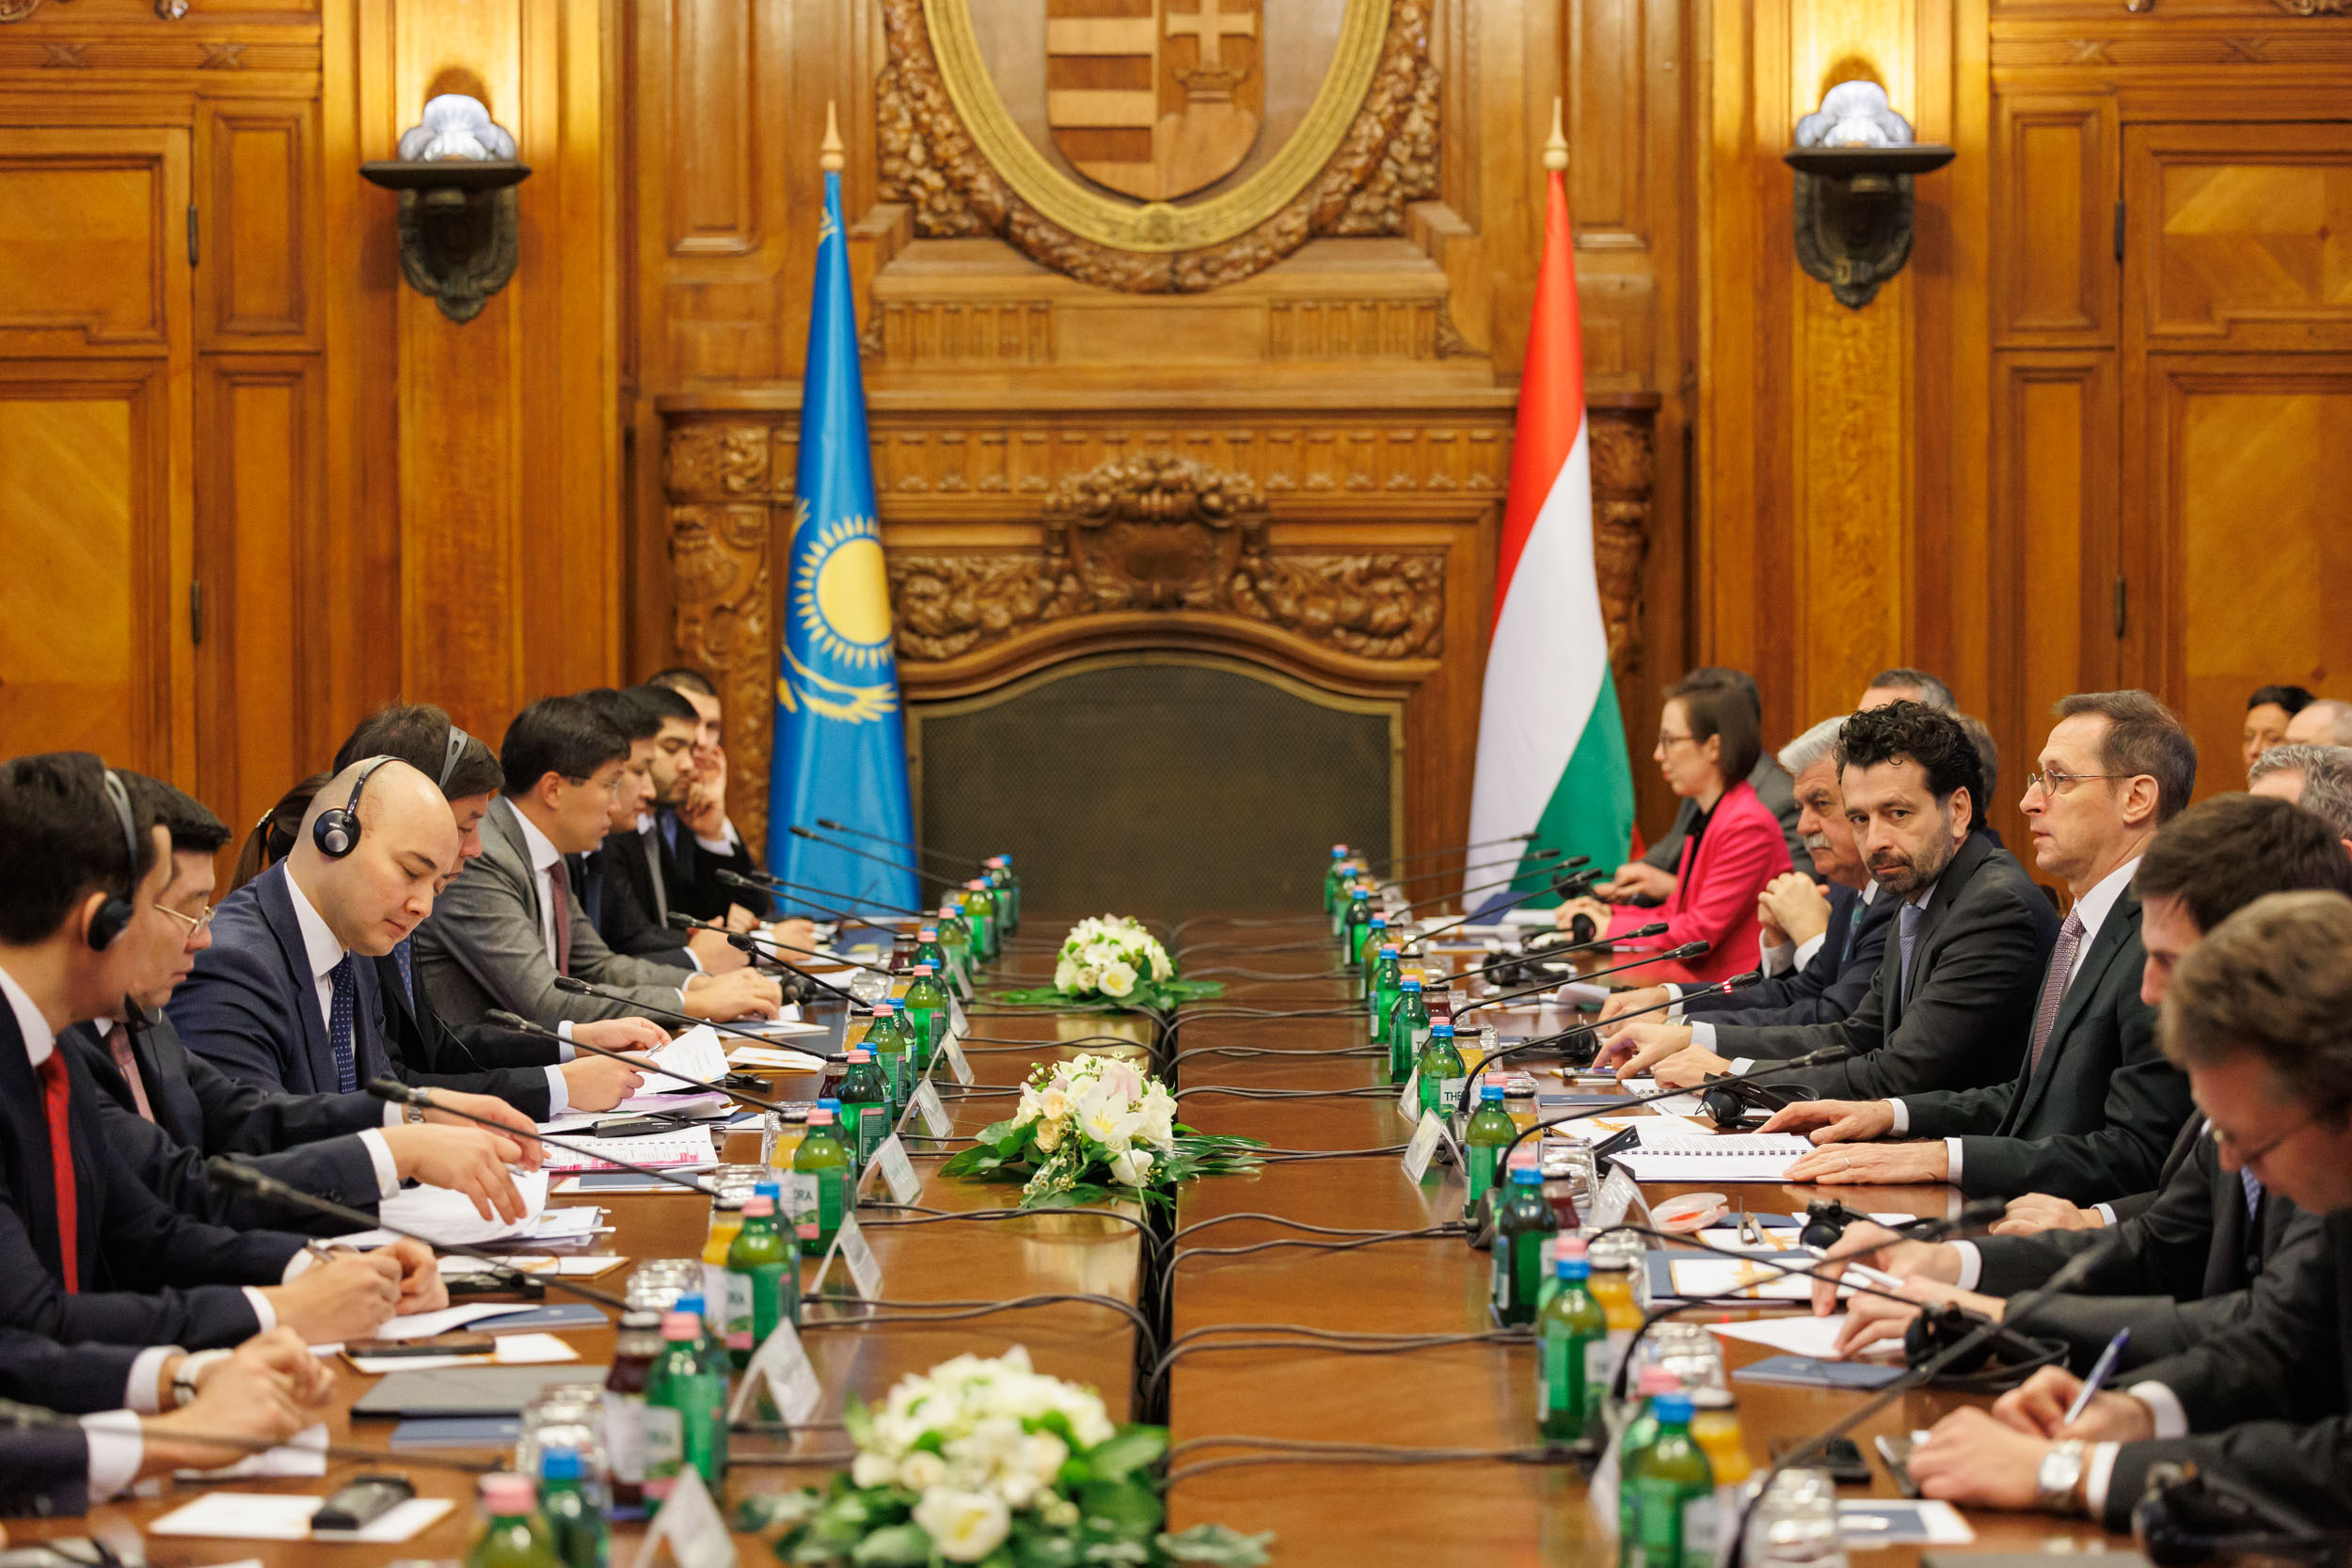 8th meeting of the Kazakh-Hungarian Intergovernmental Commission on Economic Cooperation was held in Hungary